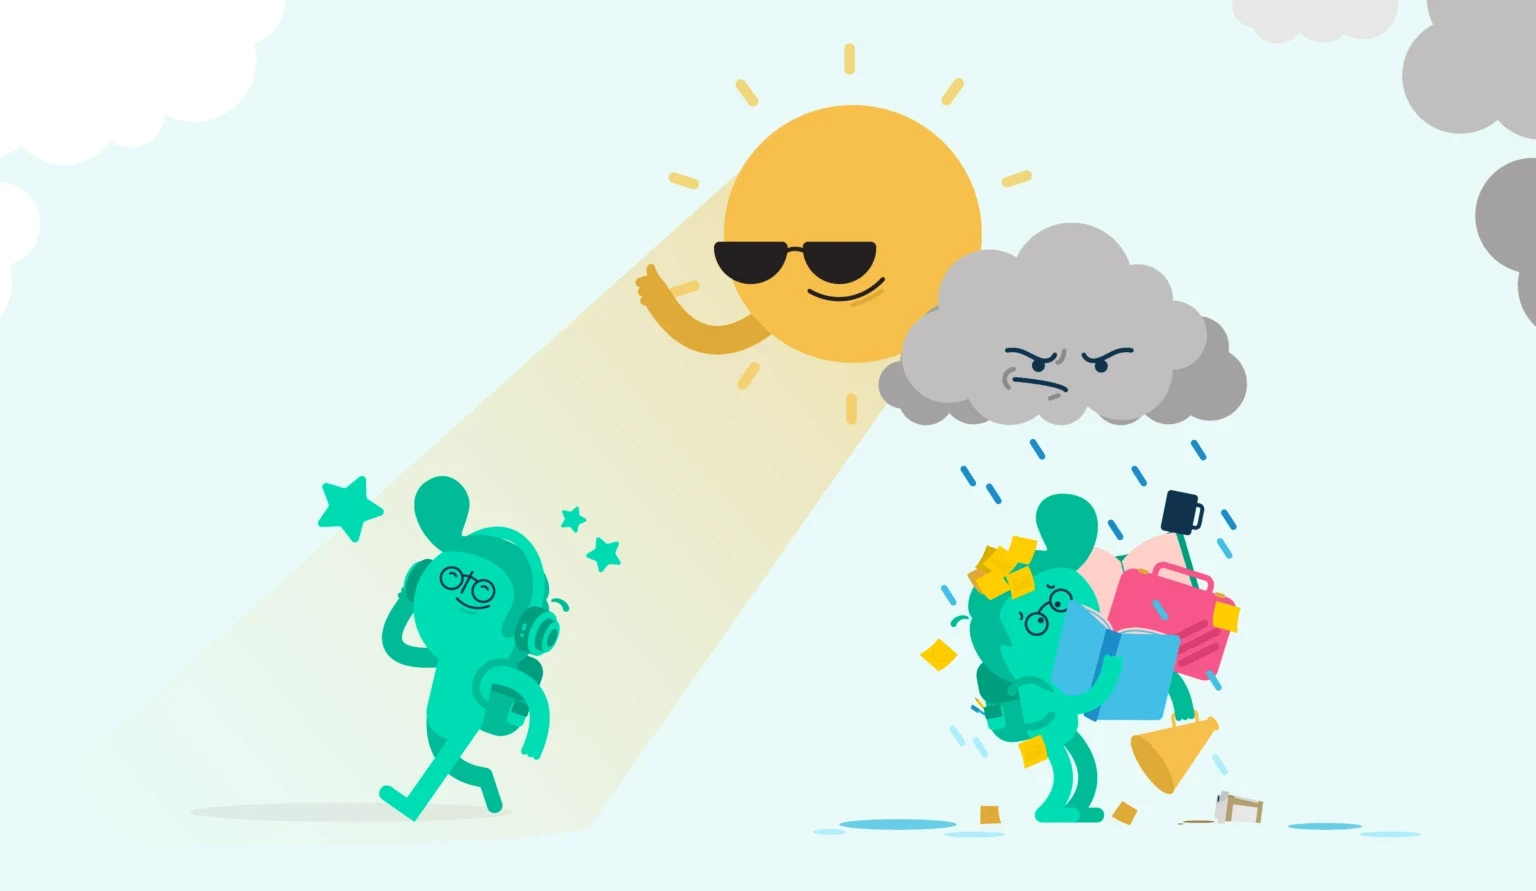 How to Stop Procrastinating, An illustration of a person struggling under an angry rainstorm while another person is walking happily under the sun, StudySmarter Magazine